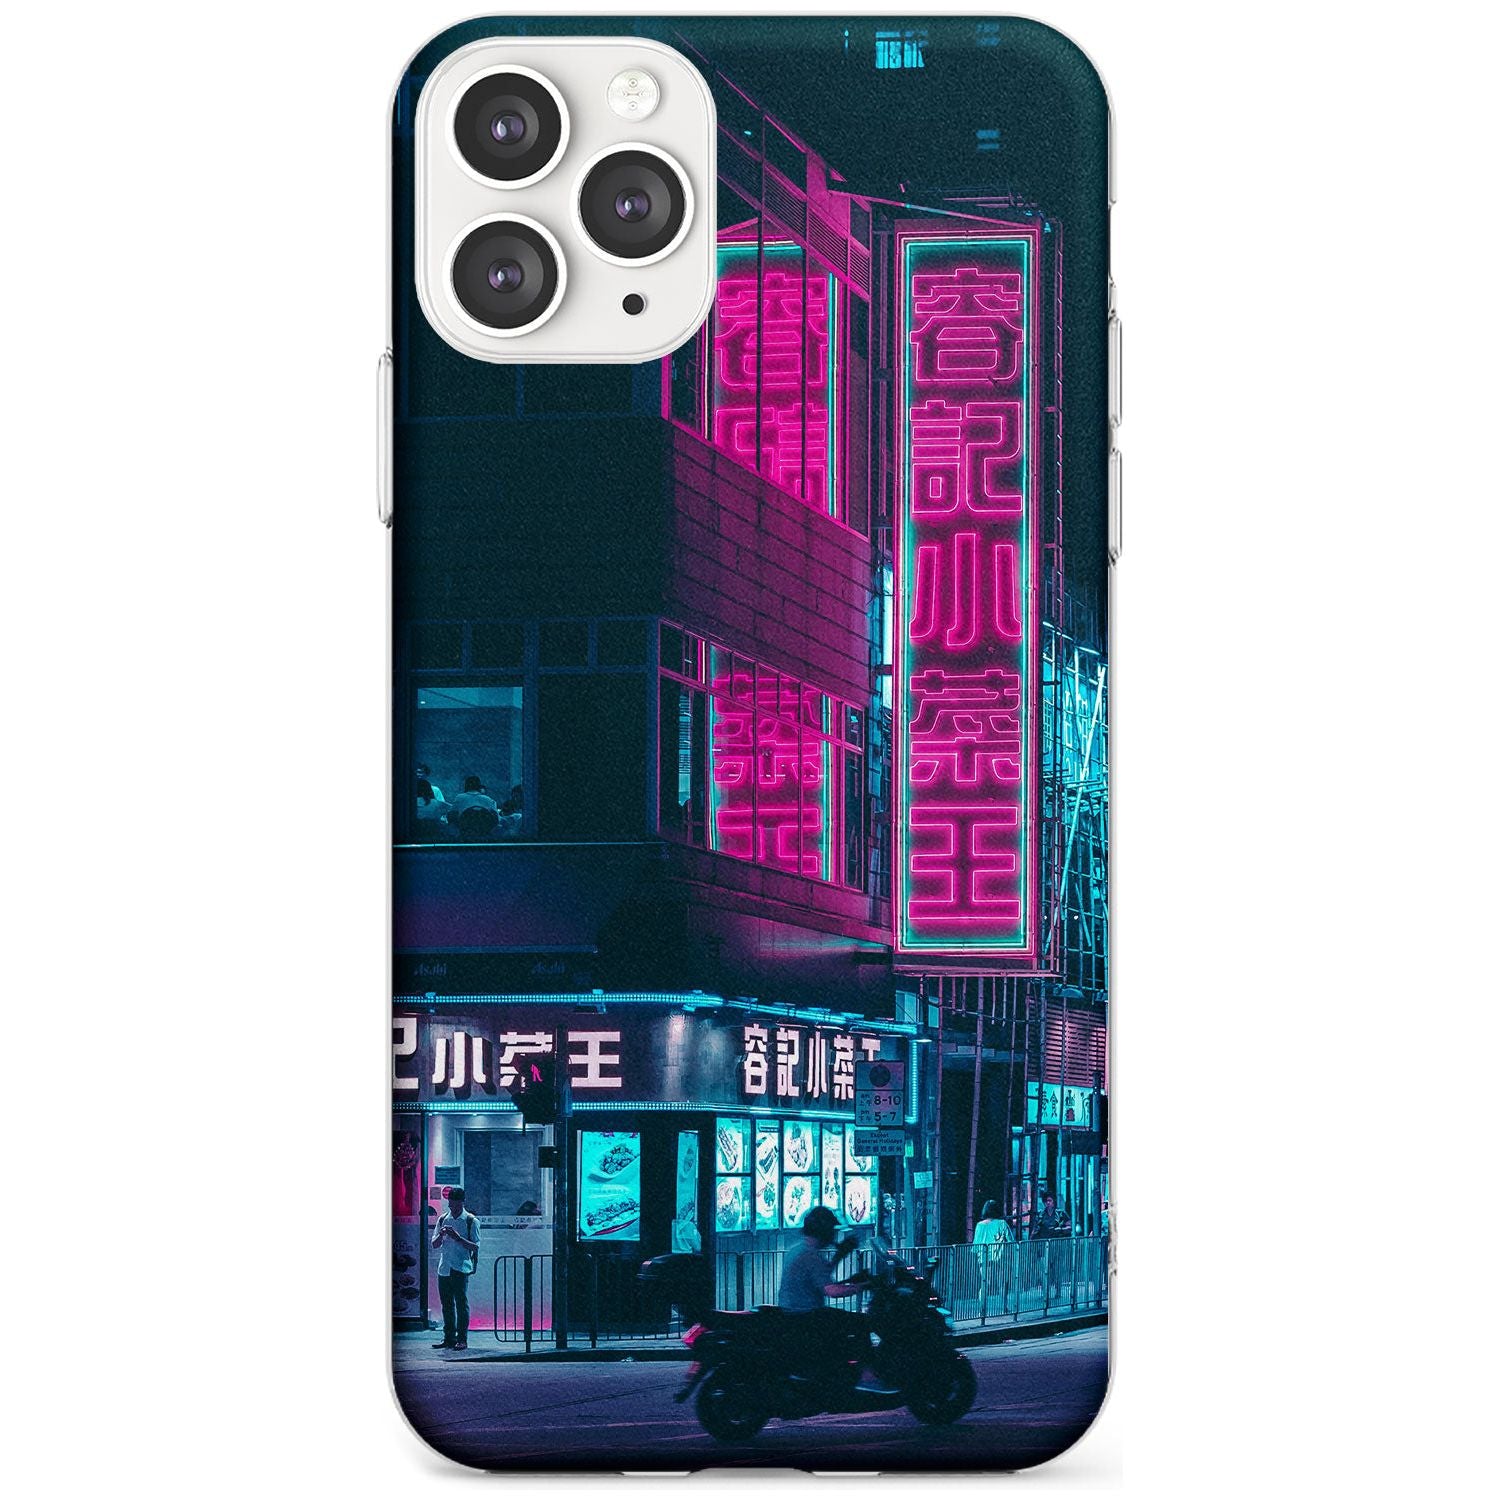 Motorcylist & Signs - Neon Cities Photographs Slim TPU Phone Case for iPhone 11 Pro Max